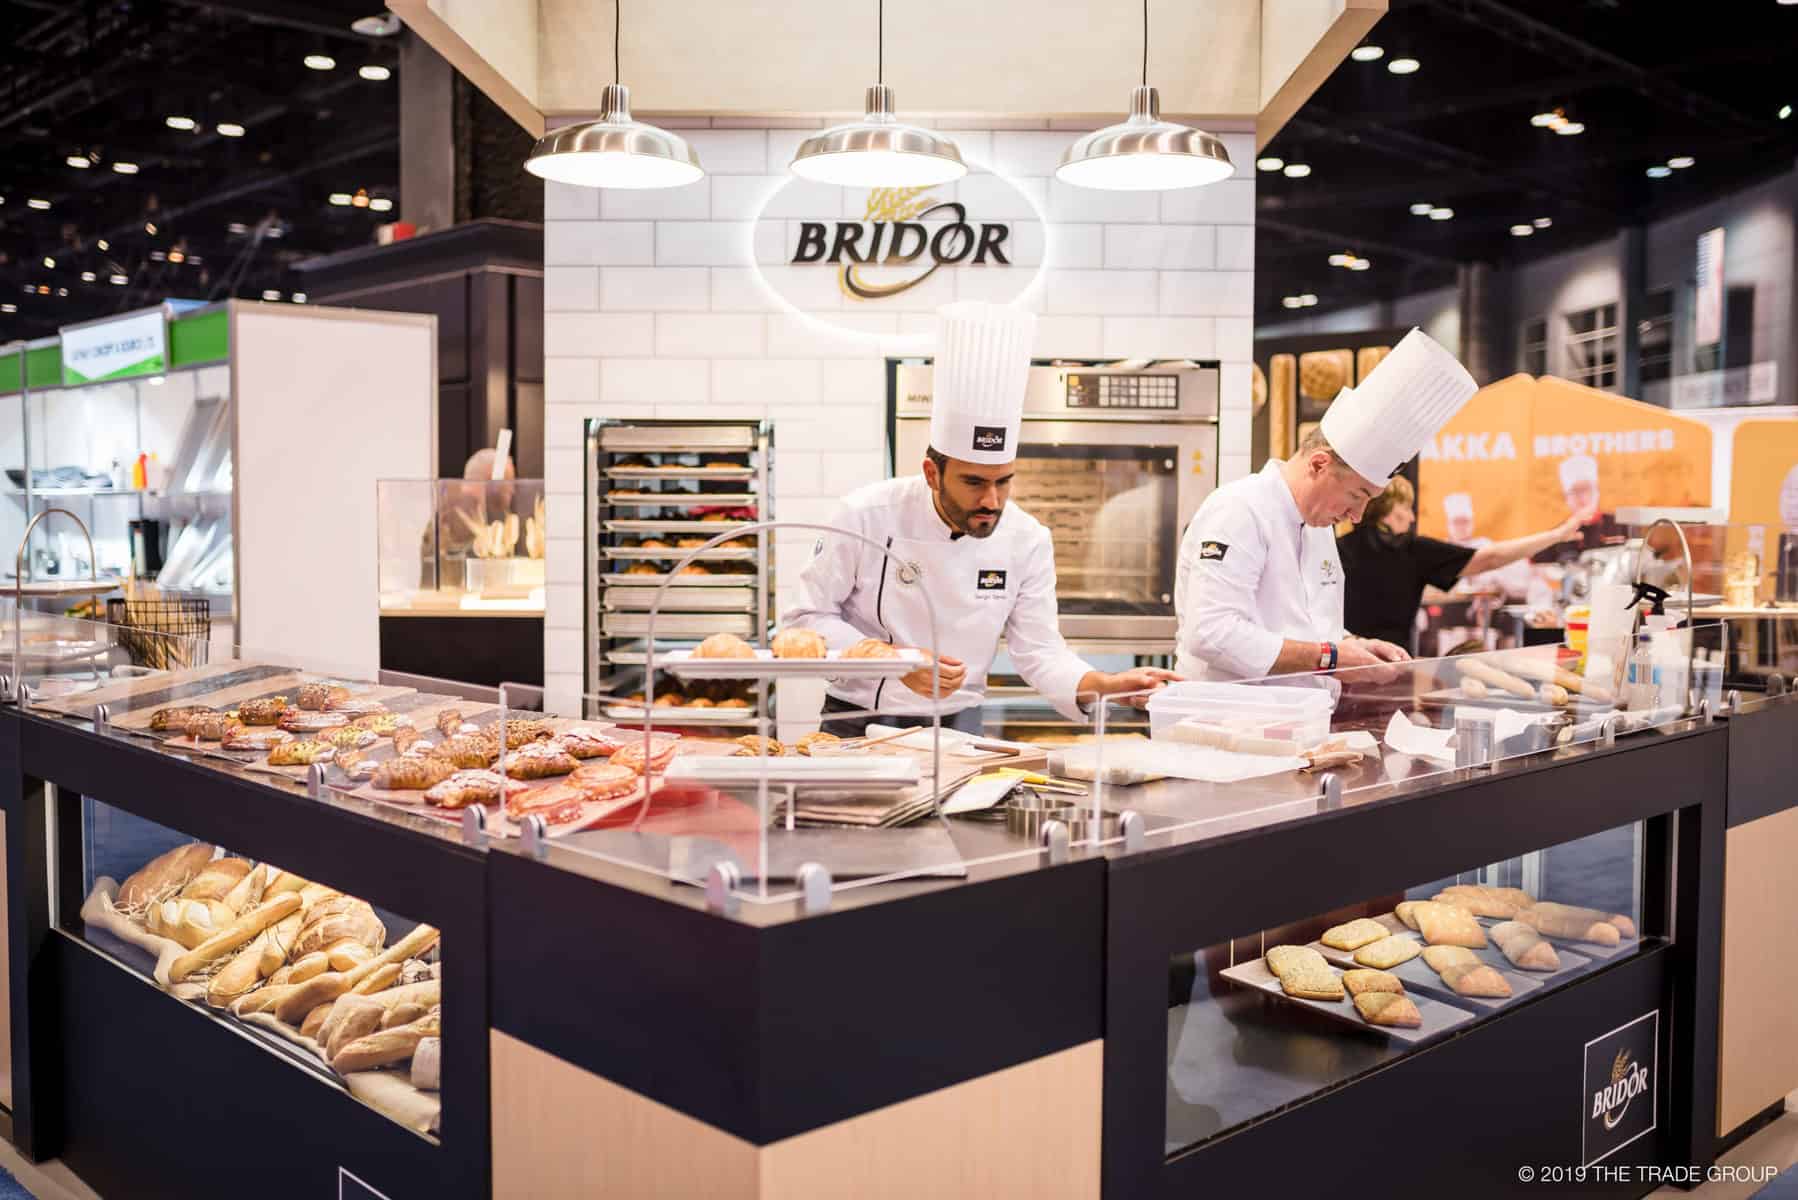 Top 12 Food & Beverage Trade Shows in North AmericaThe Trade Group